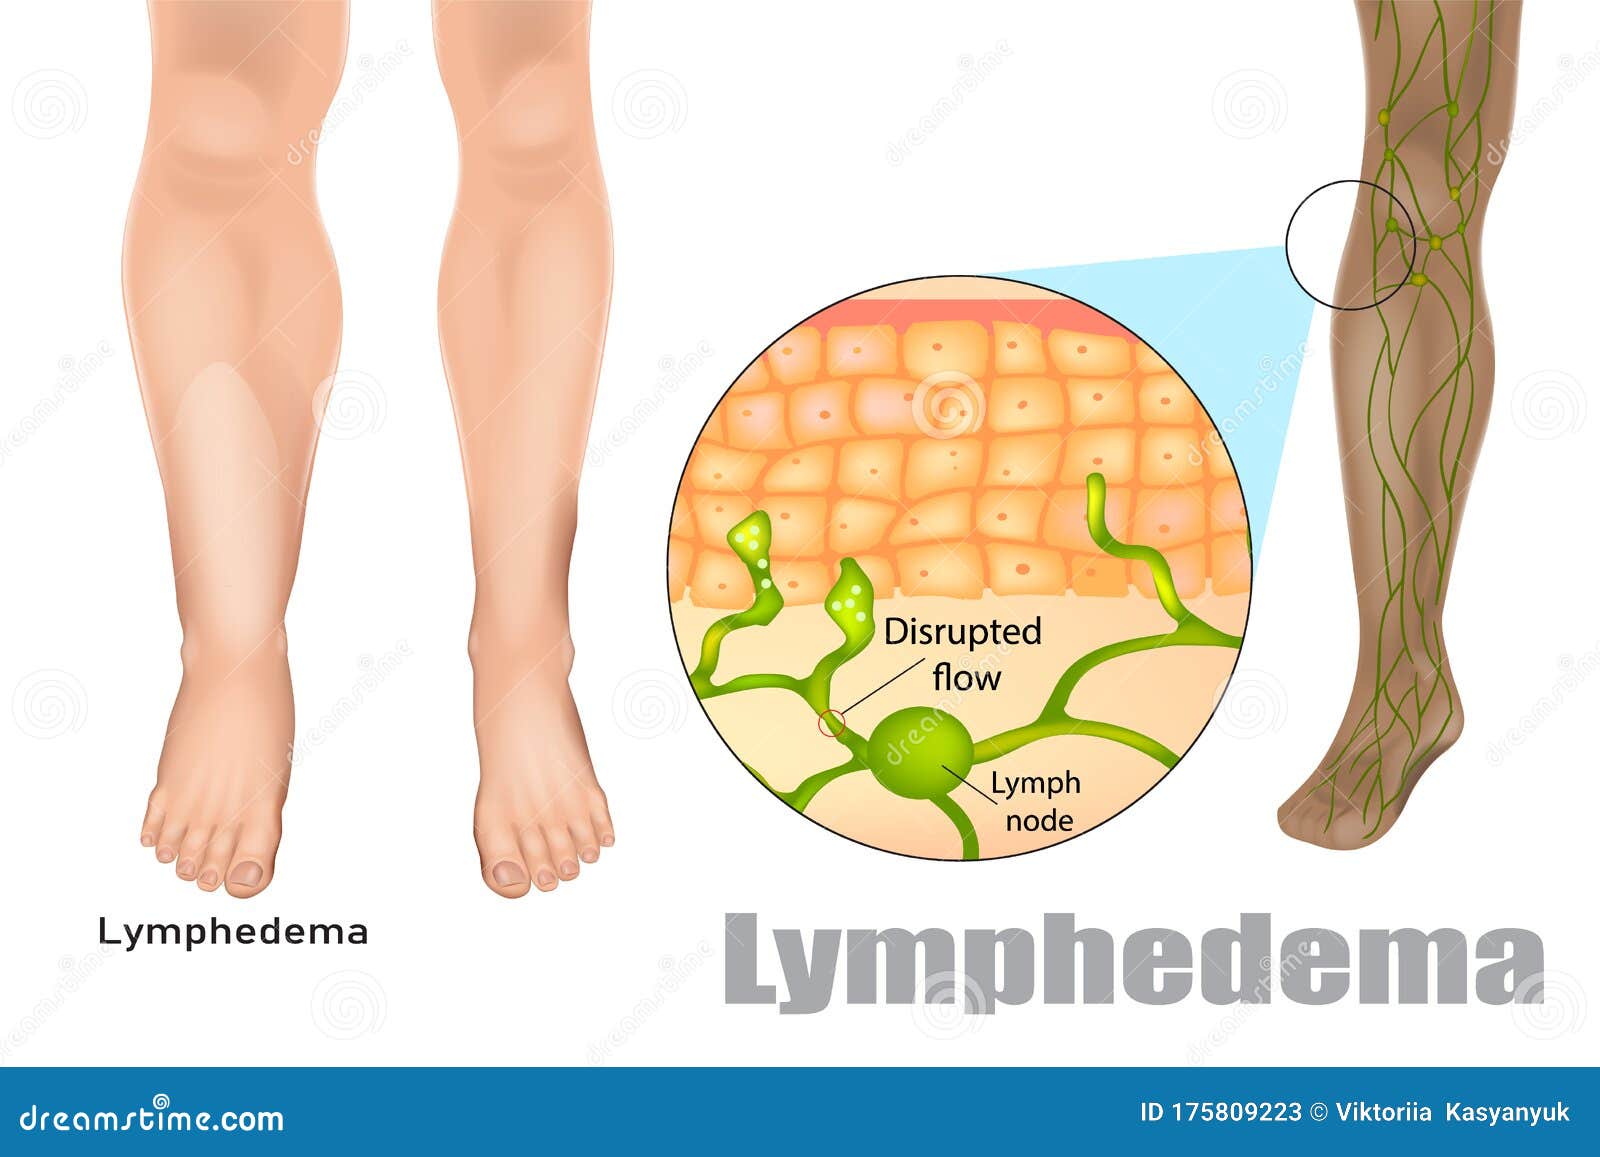 lymphedema, also known as lymphoedema